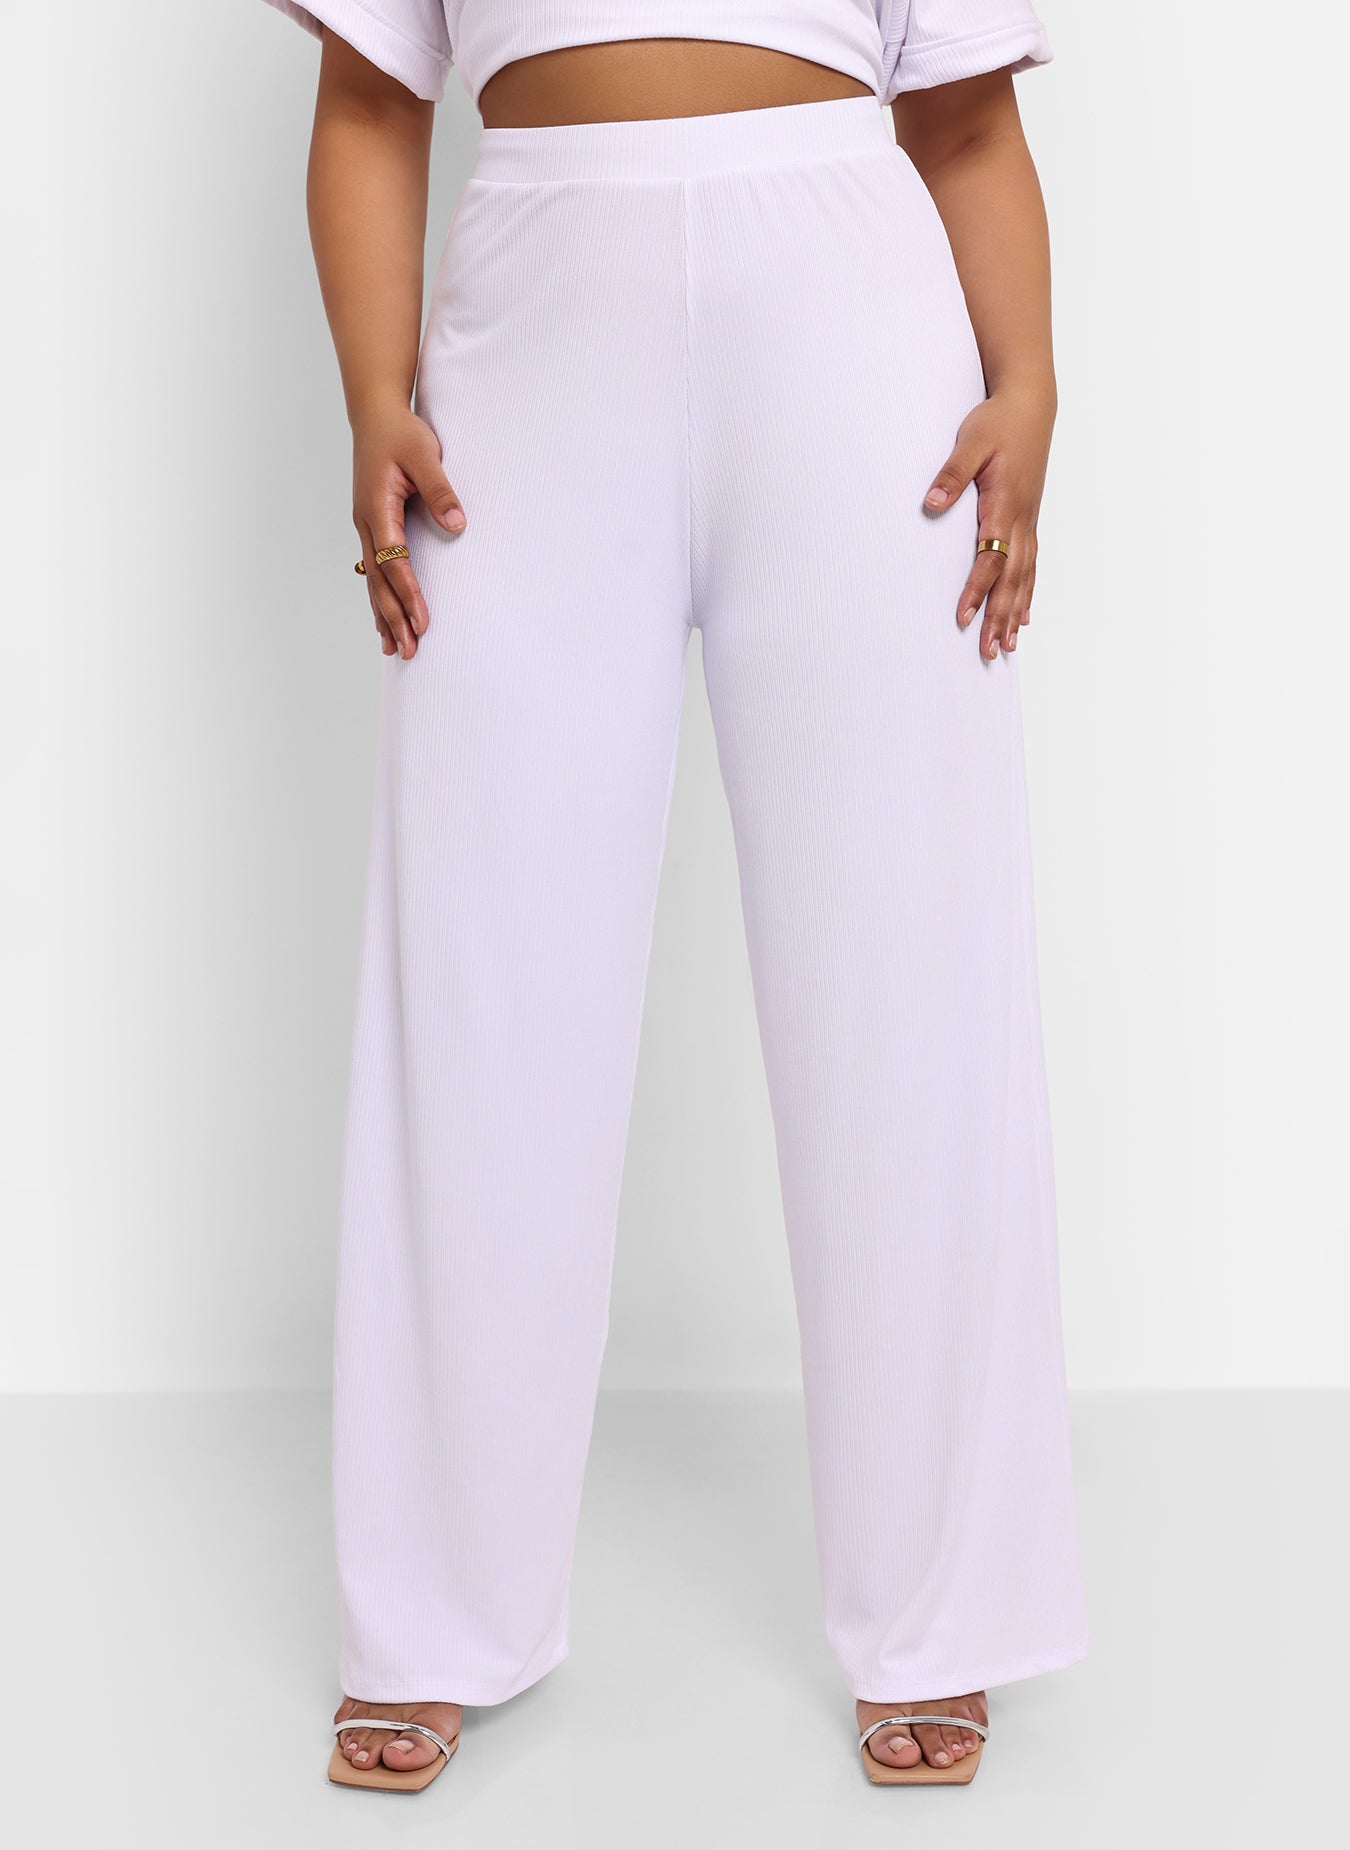 Whitney Ribbed Top & Wide Leg Pant Set